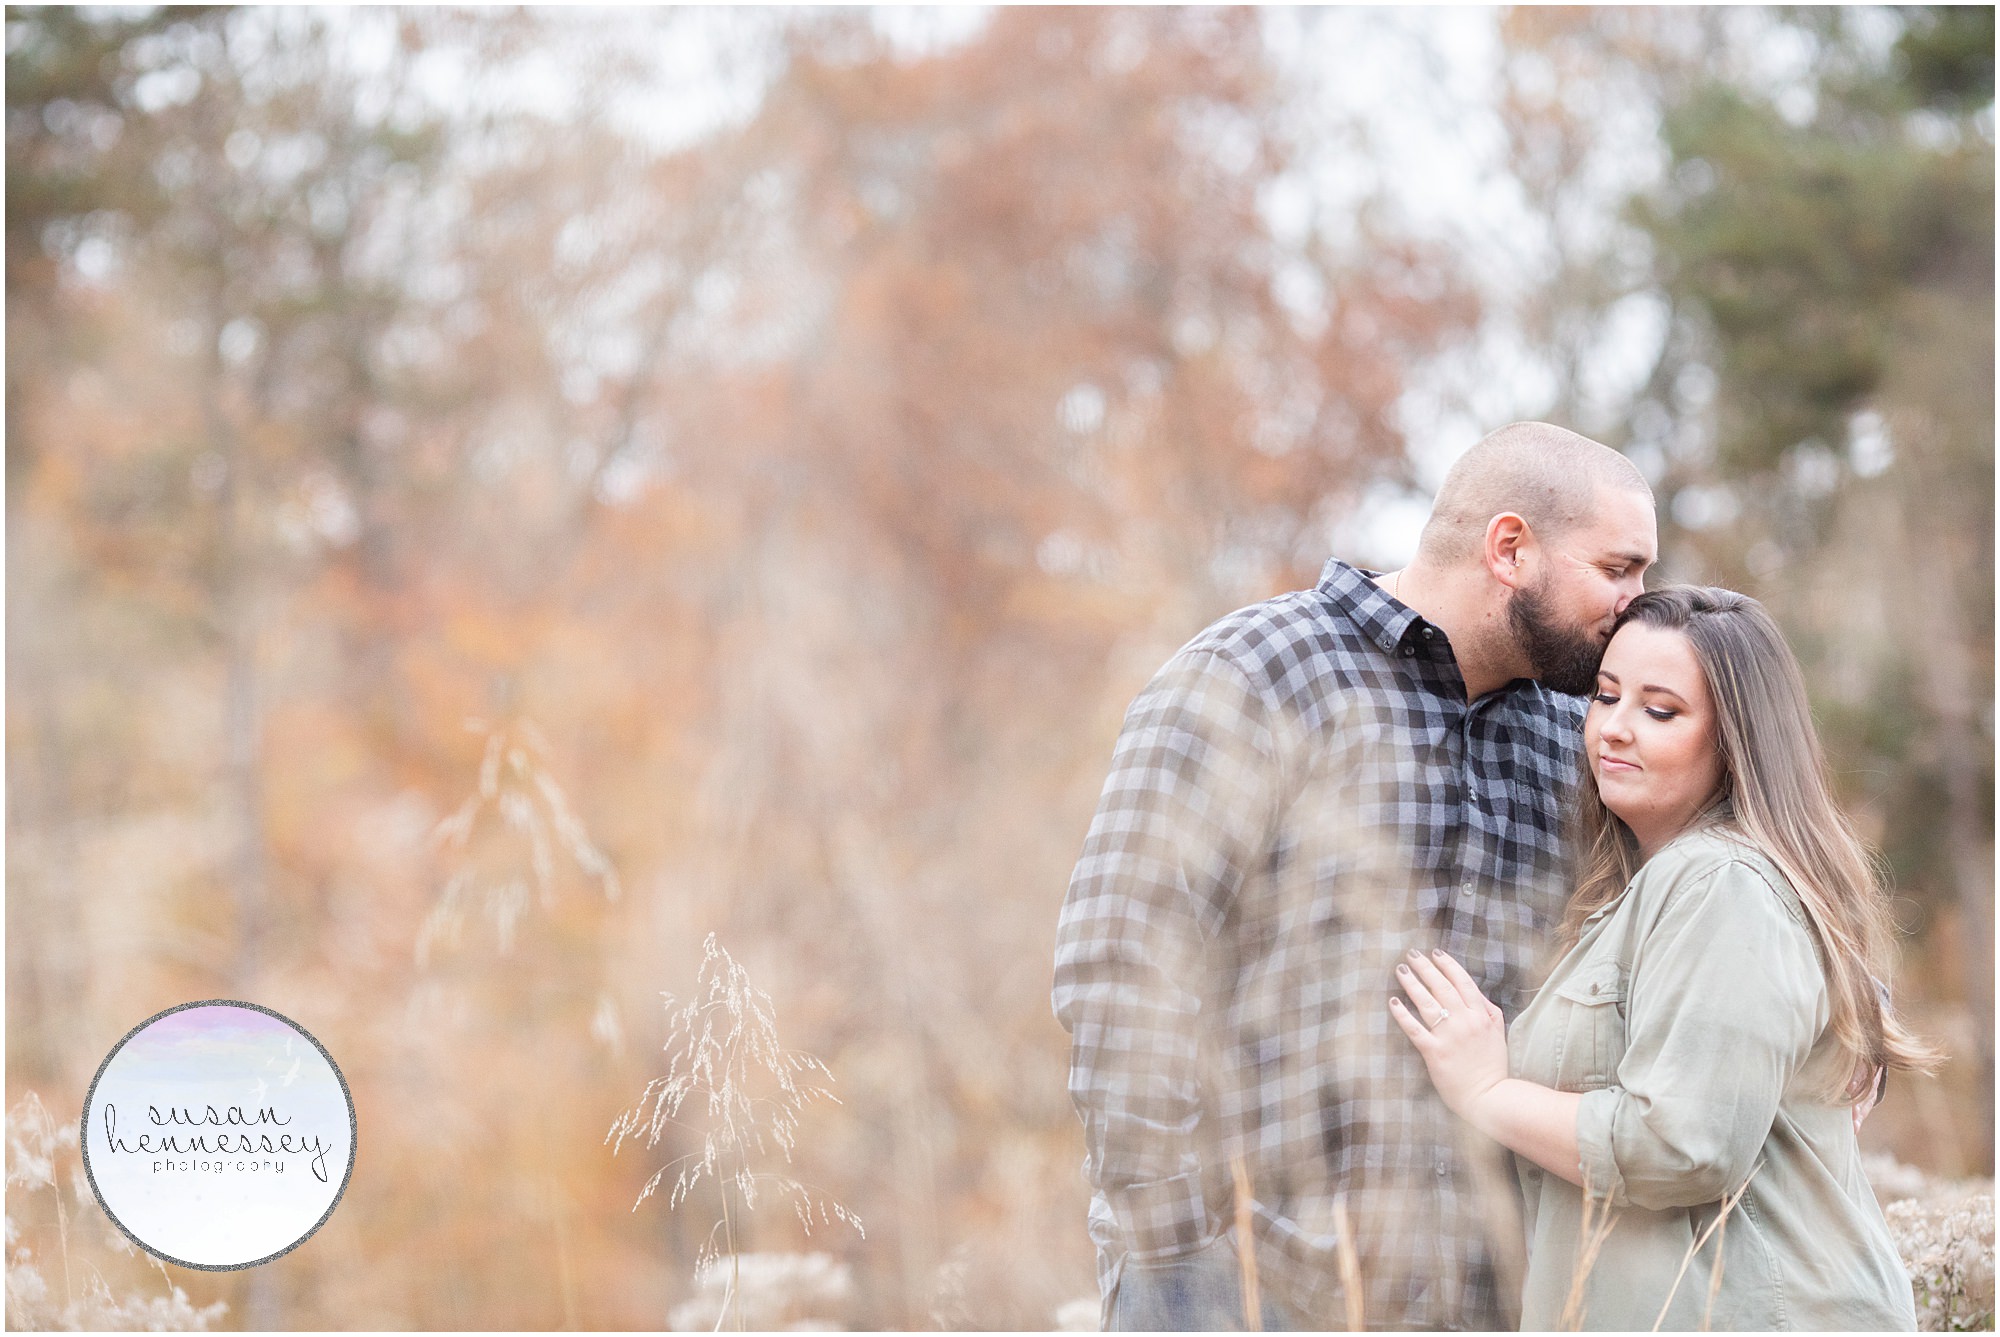 Engagement session in at Smithville Park and Smith's Woods in Eastampton, NJ